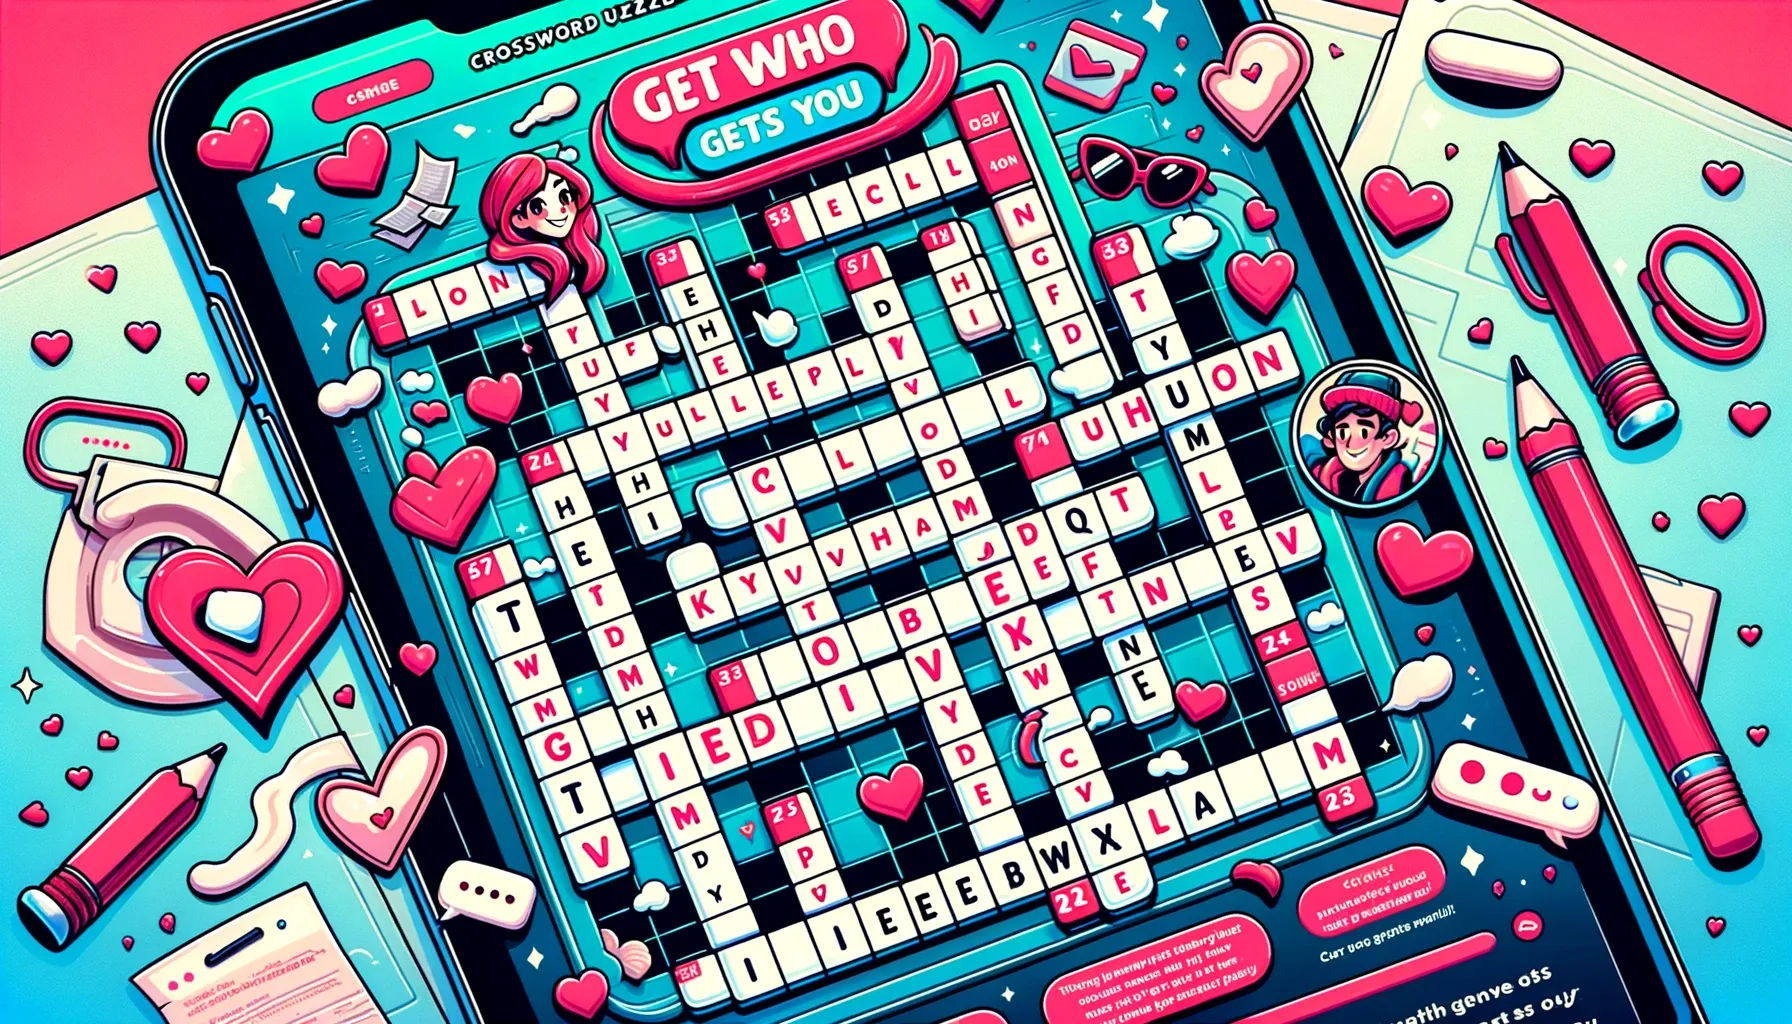 Get Who Gets You Dating Site Crossword Puzzle Game